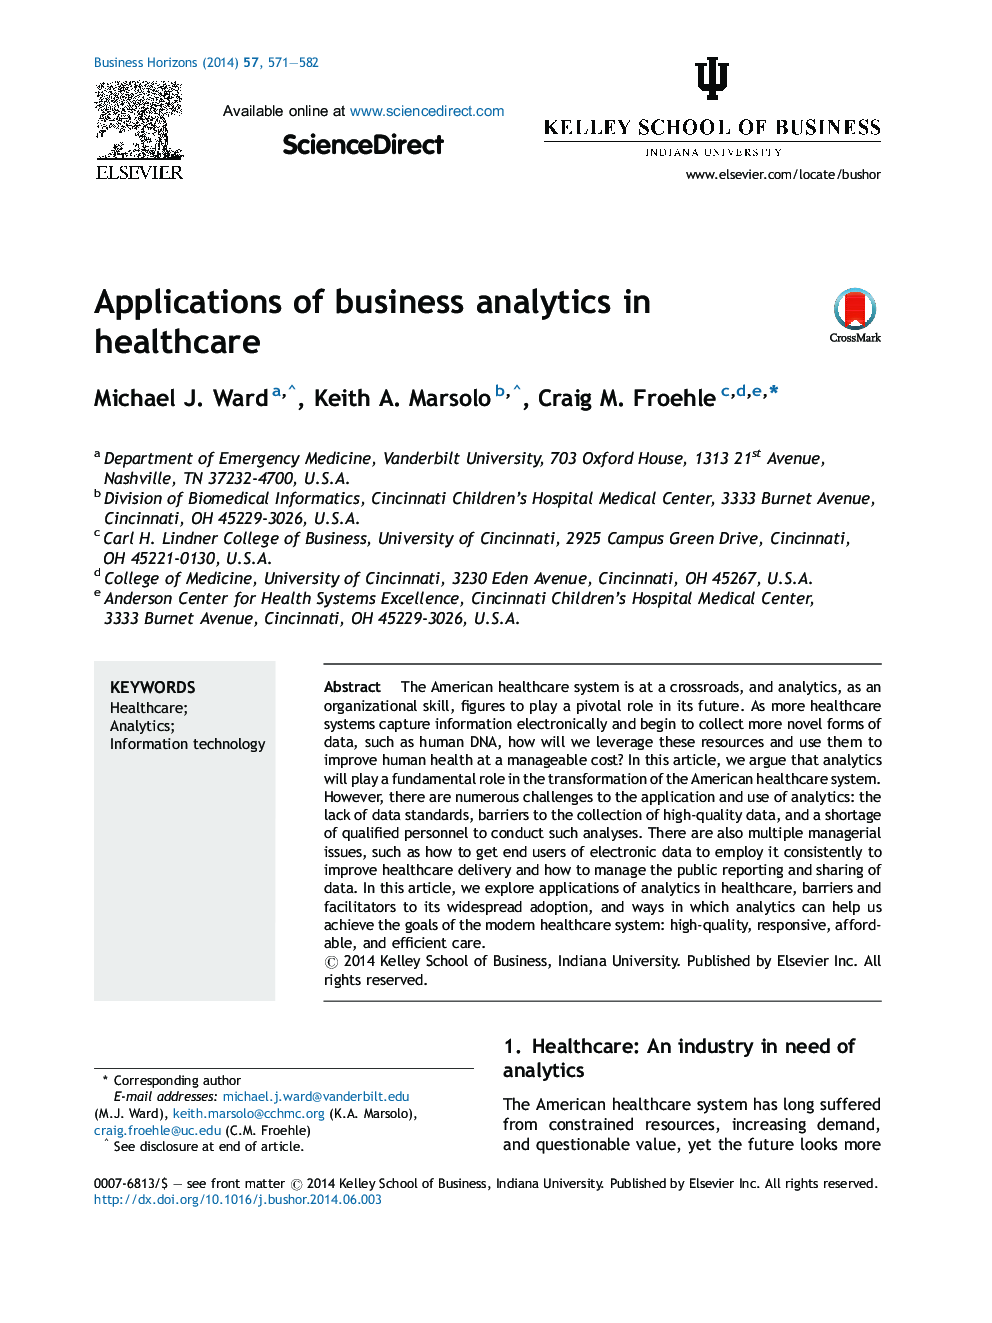 Applications of business analytics in healthcare